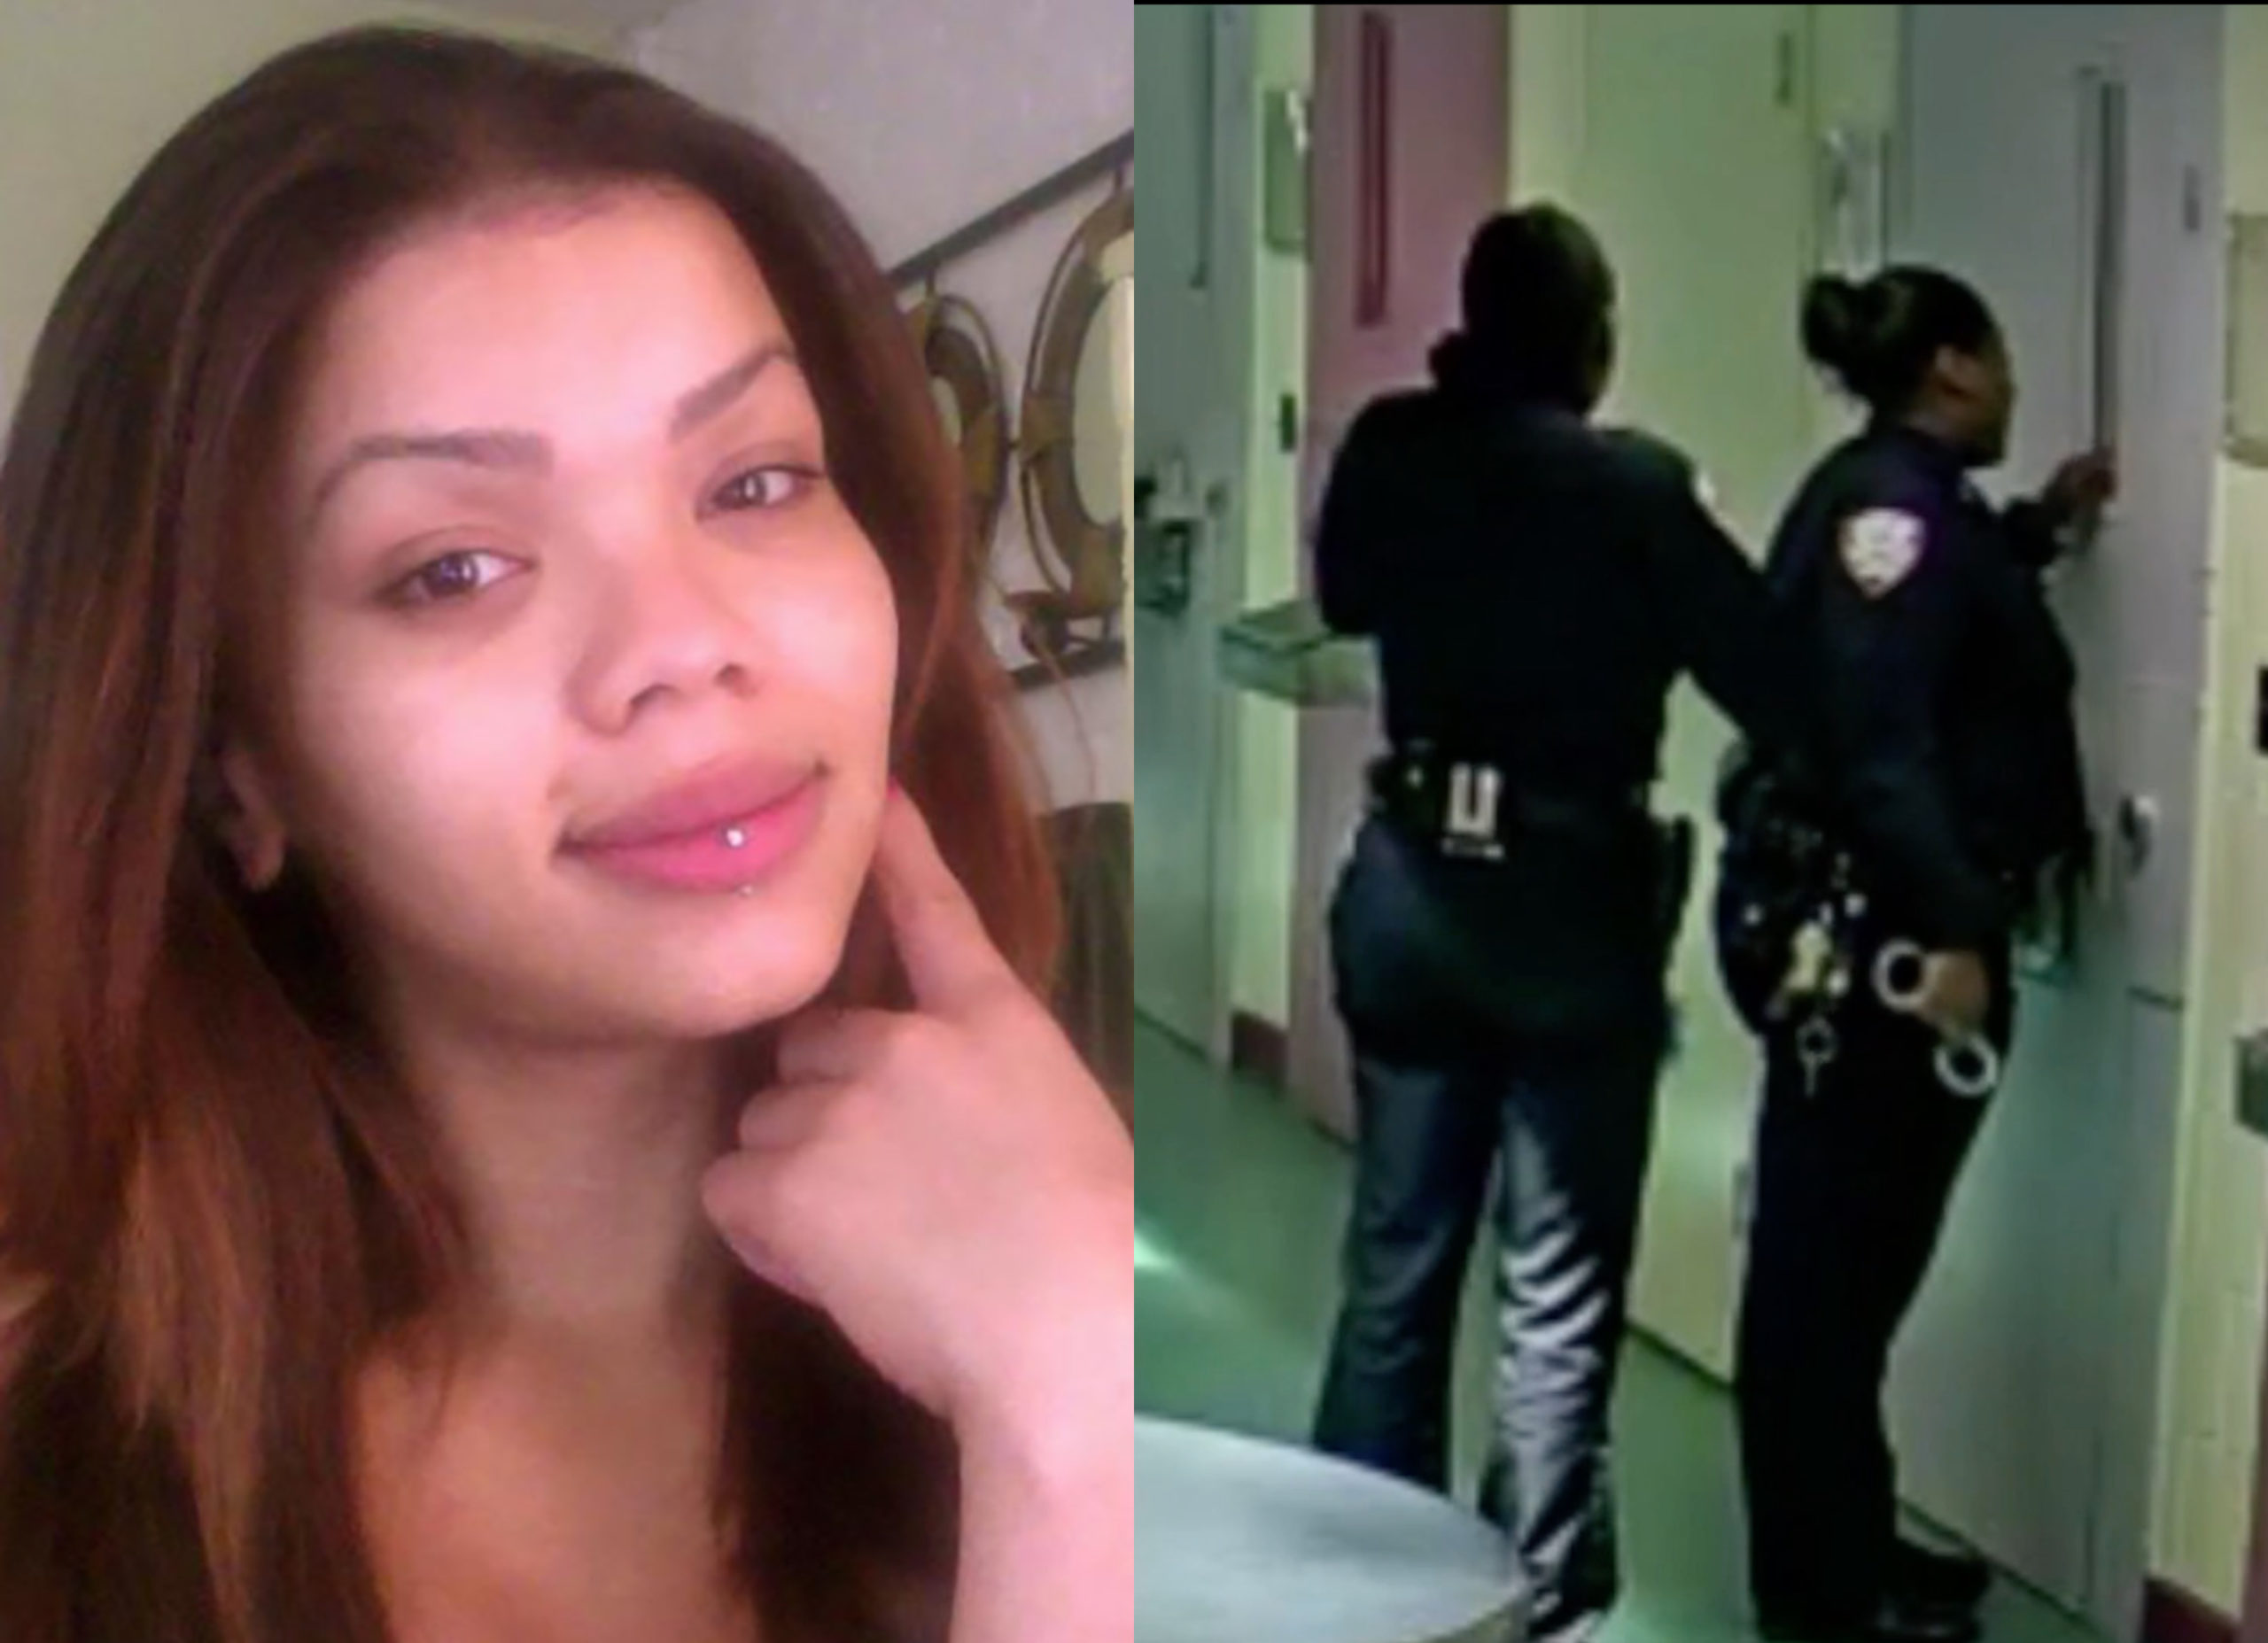 Layleen Xtravaganza Cubilette-Polanco's death spared outcry for typifying the failures of the criminal justice system for trans women of colour. (Facebook/Polanco family attorney)